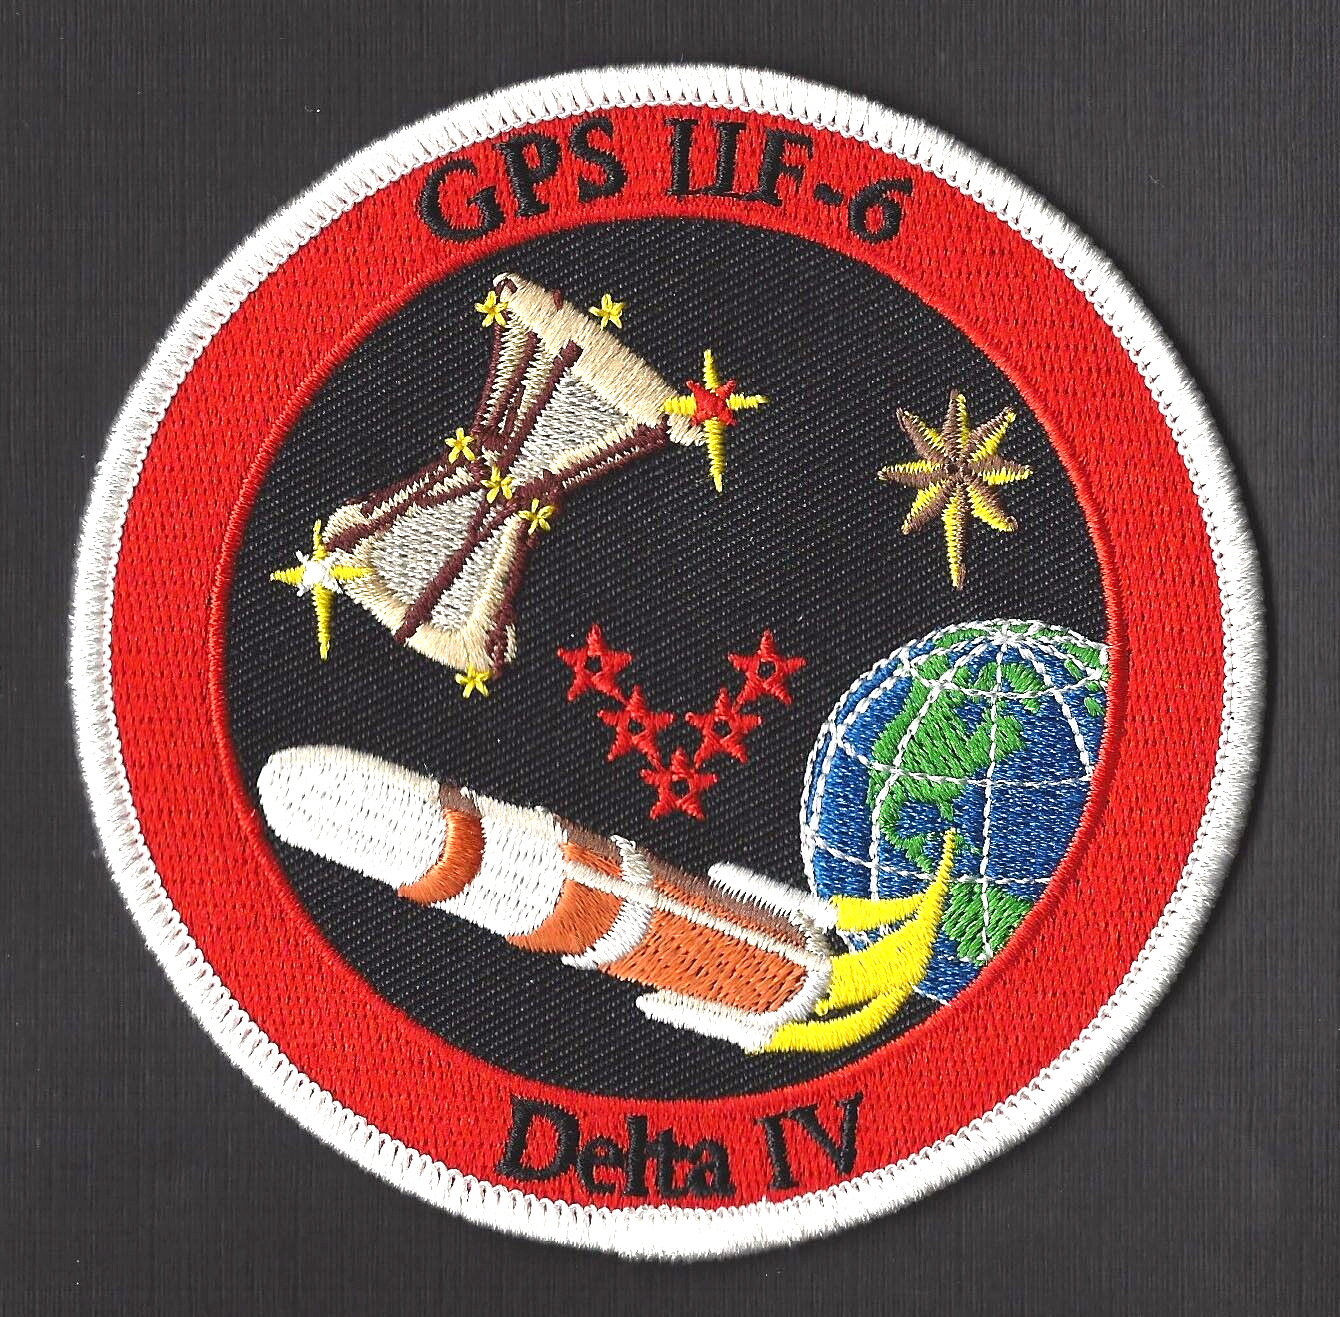 GPS IIF-6 DELTA IV Launch USAF ULA 5 SLS CCAFS SATELLITE Launch SPACE PATCH